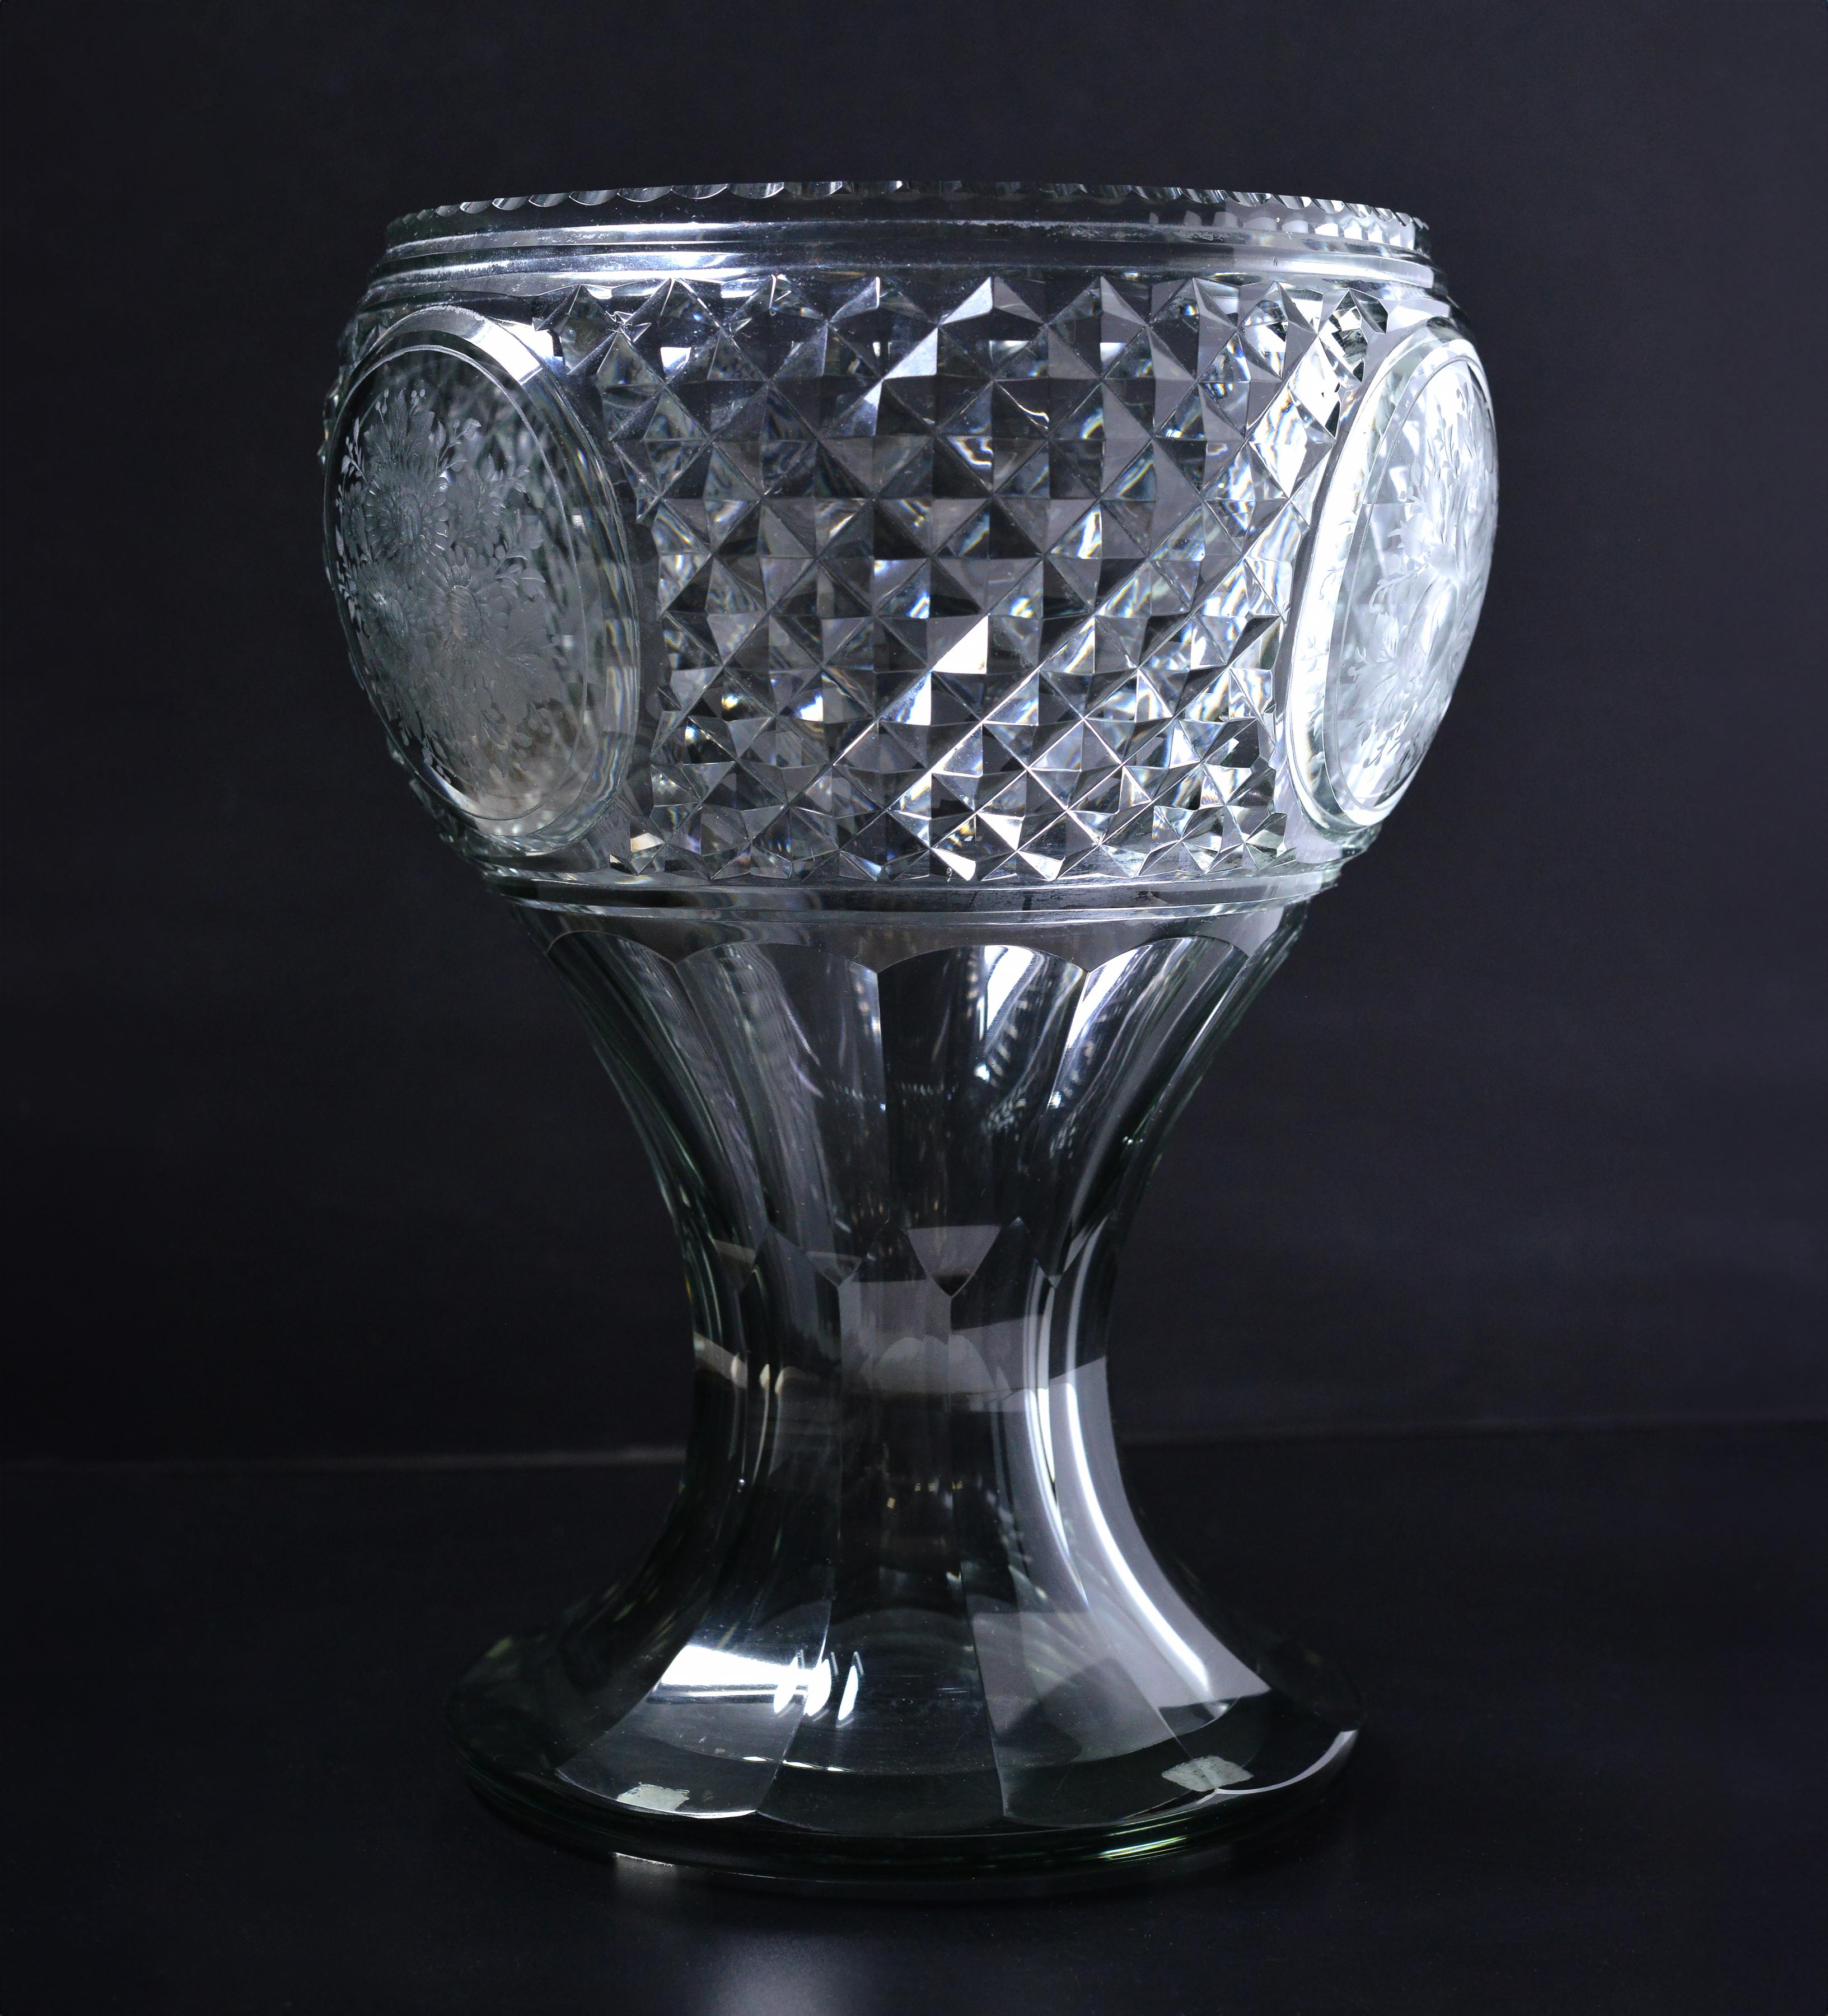 Baroque Antique Russian Carved Crystal Glass Vase with Floral Engraved 19th century For Sale